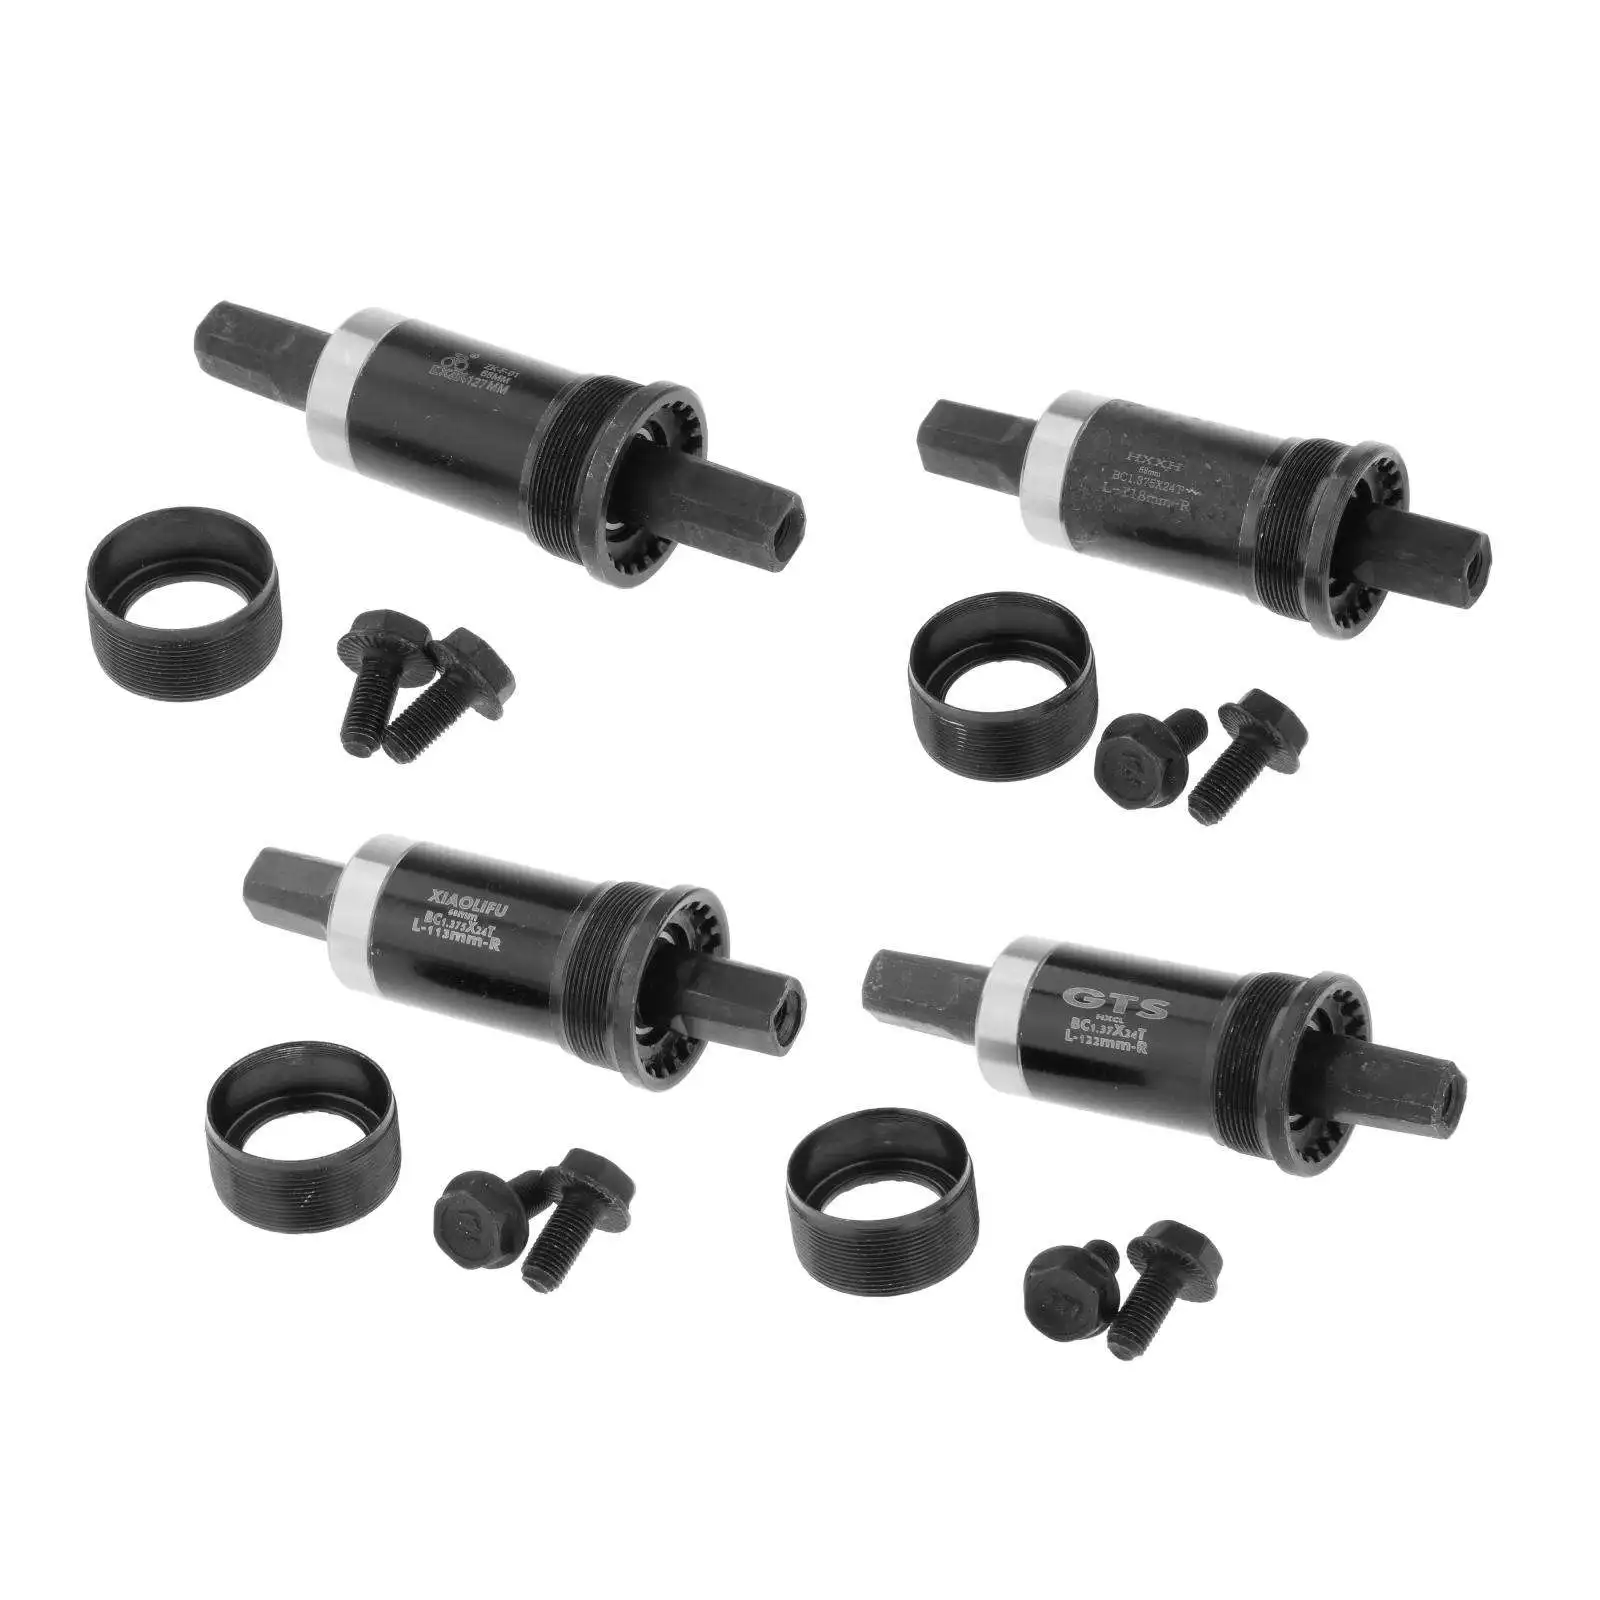 MTB Mountain Road Bicycle Bottom Bracket BB68 Square Hole Crank 113/118/122.5/127mm with Waterproof Screws